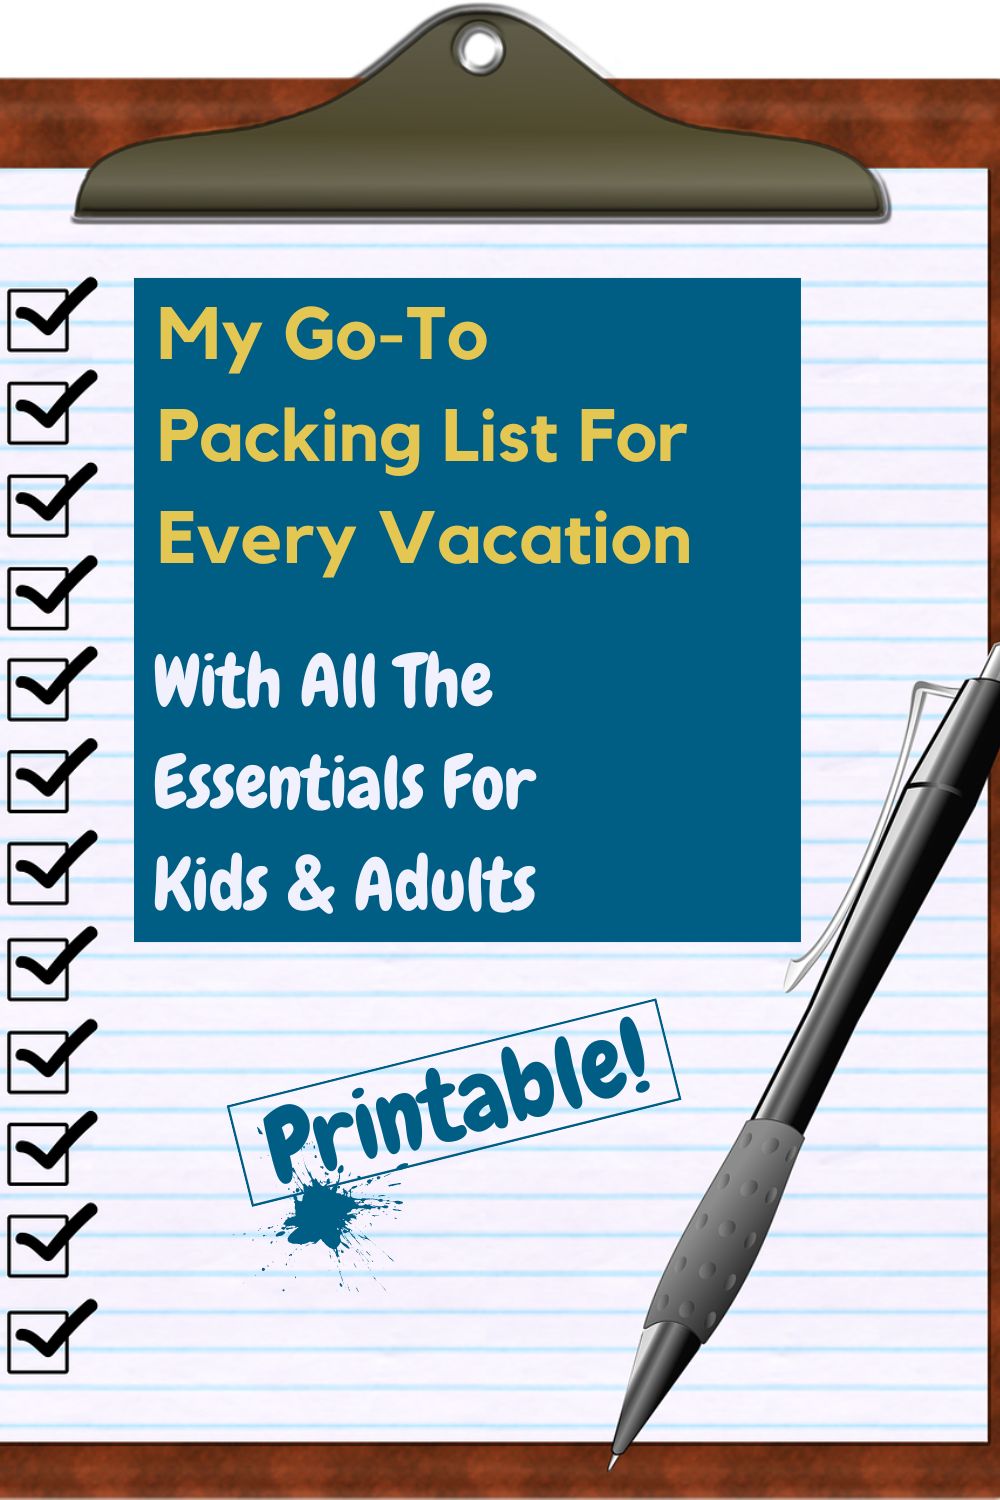 download and print my go-to family packing list for every vacation; use it to let kids pack their own suitcases.